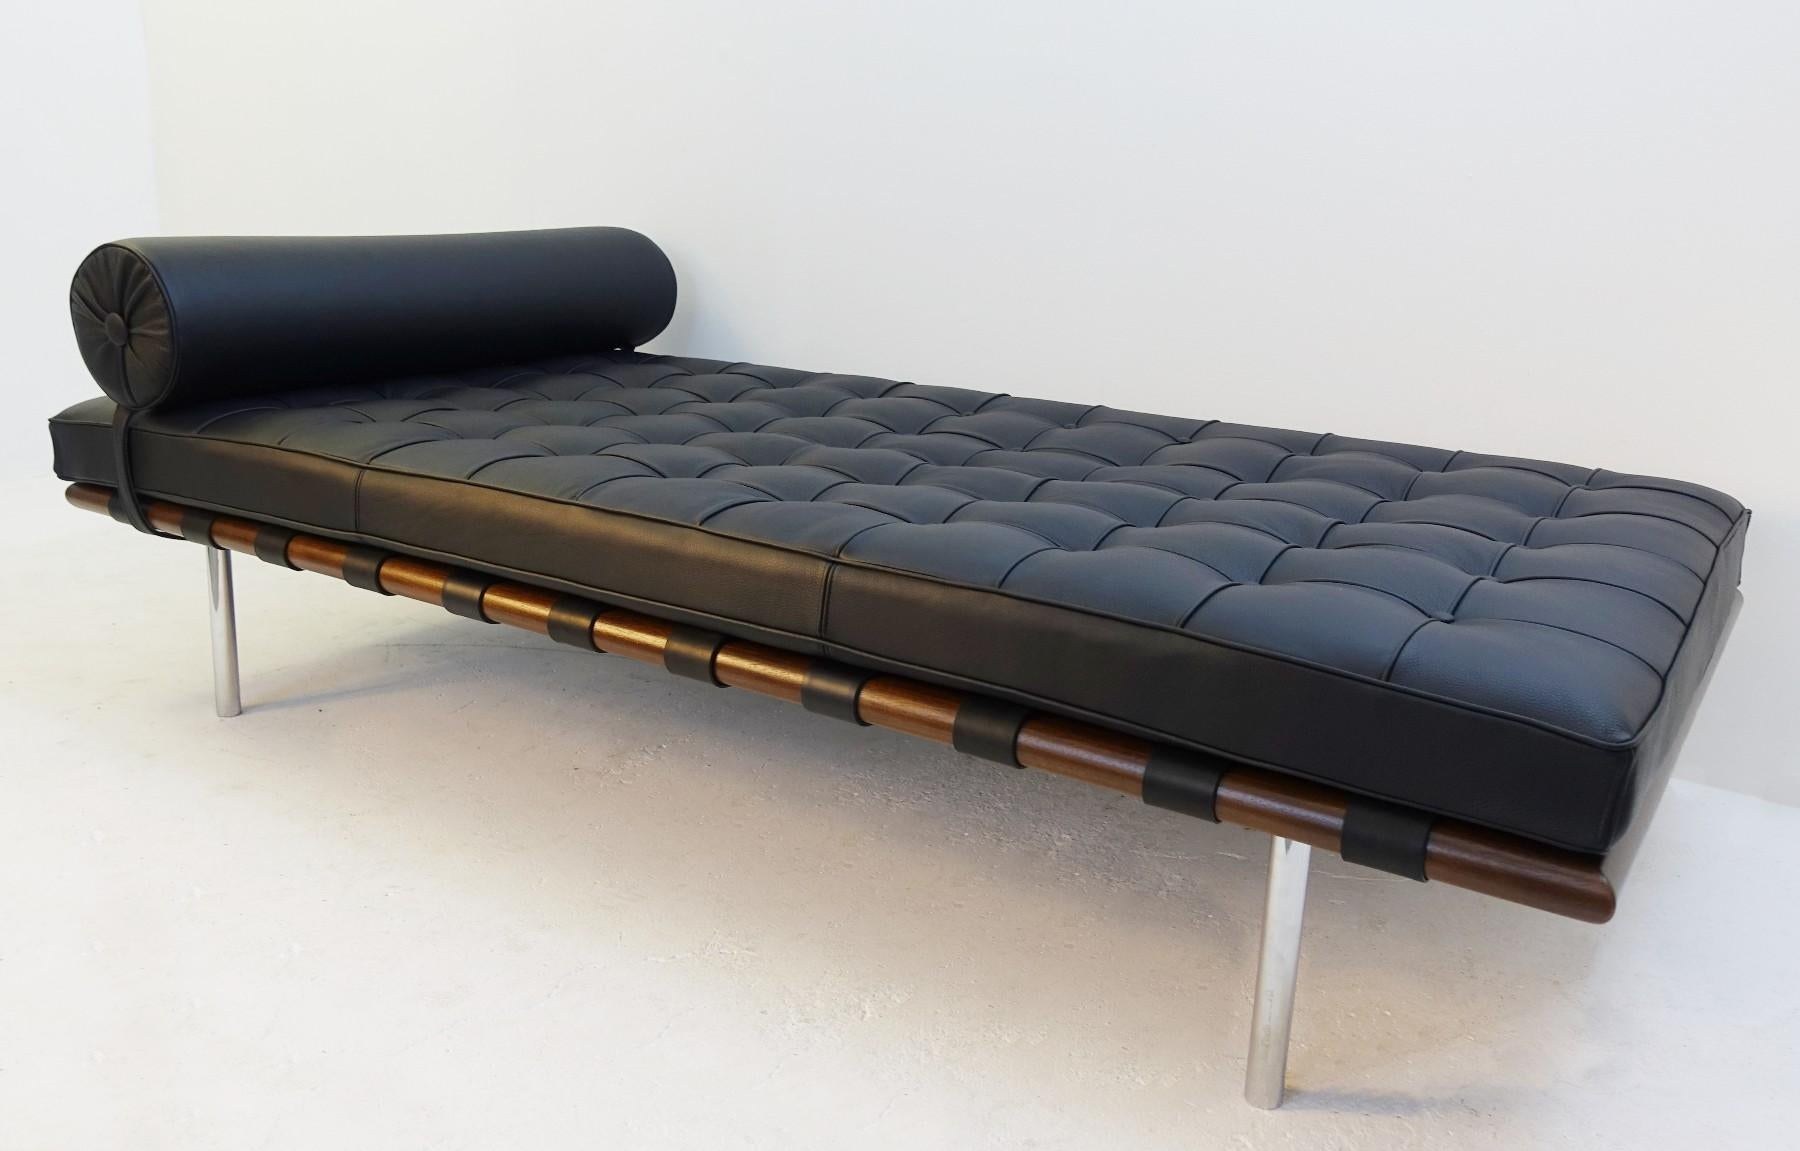 Barcelona couch, daybed by Ludwig Mies van der Rohe for Knoll.